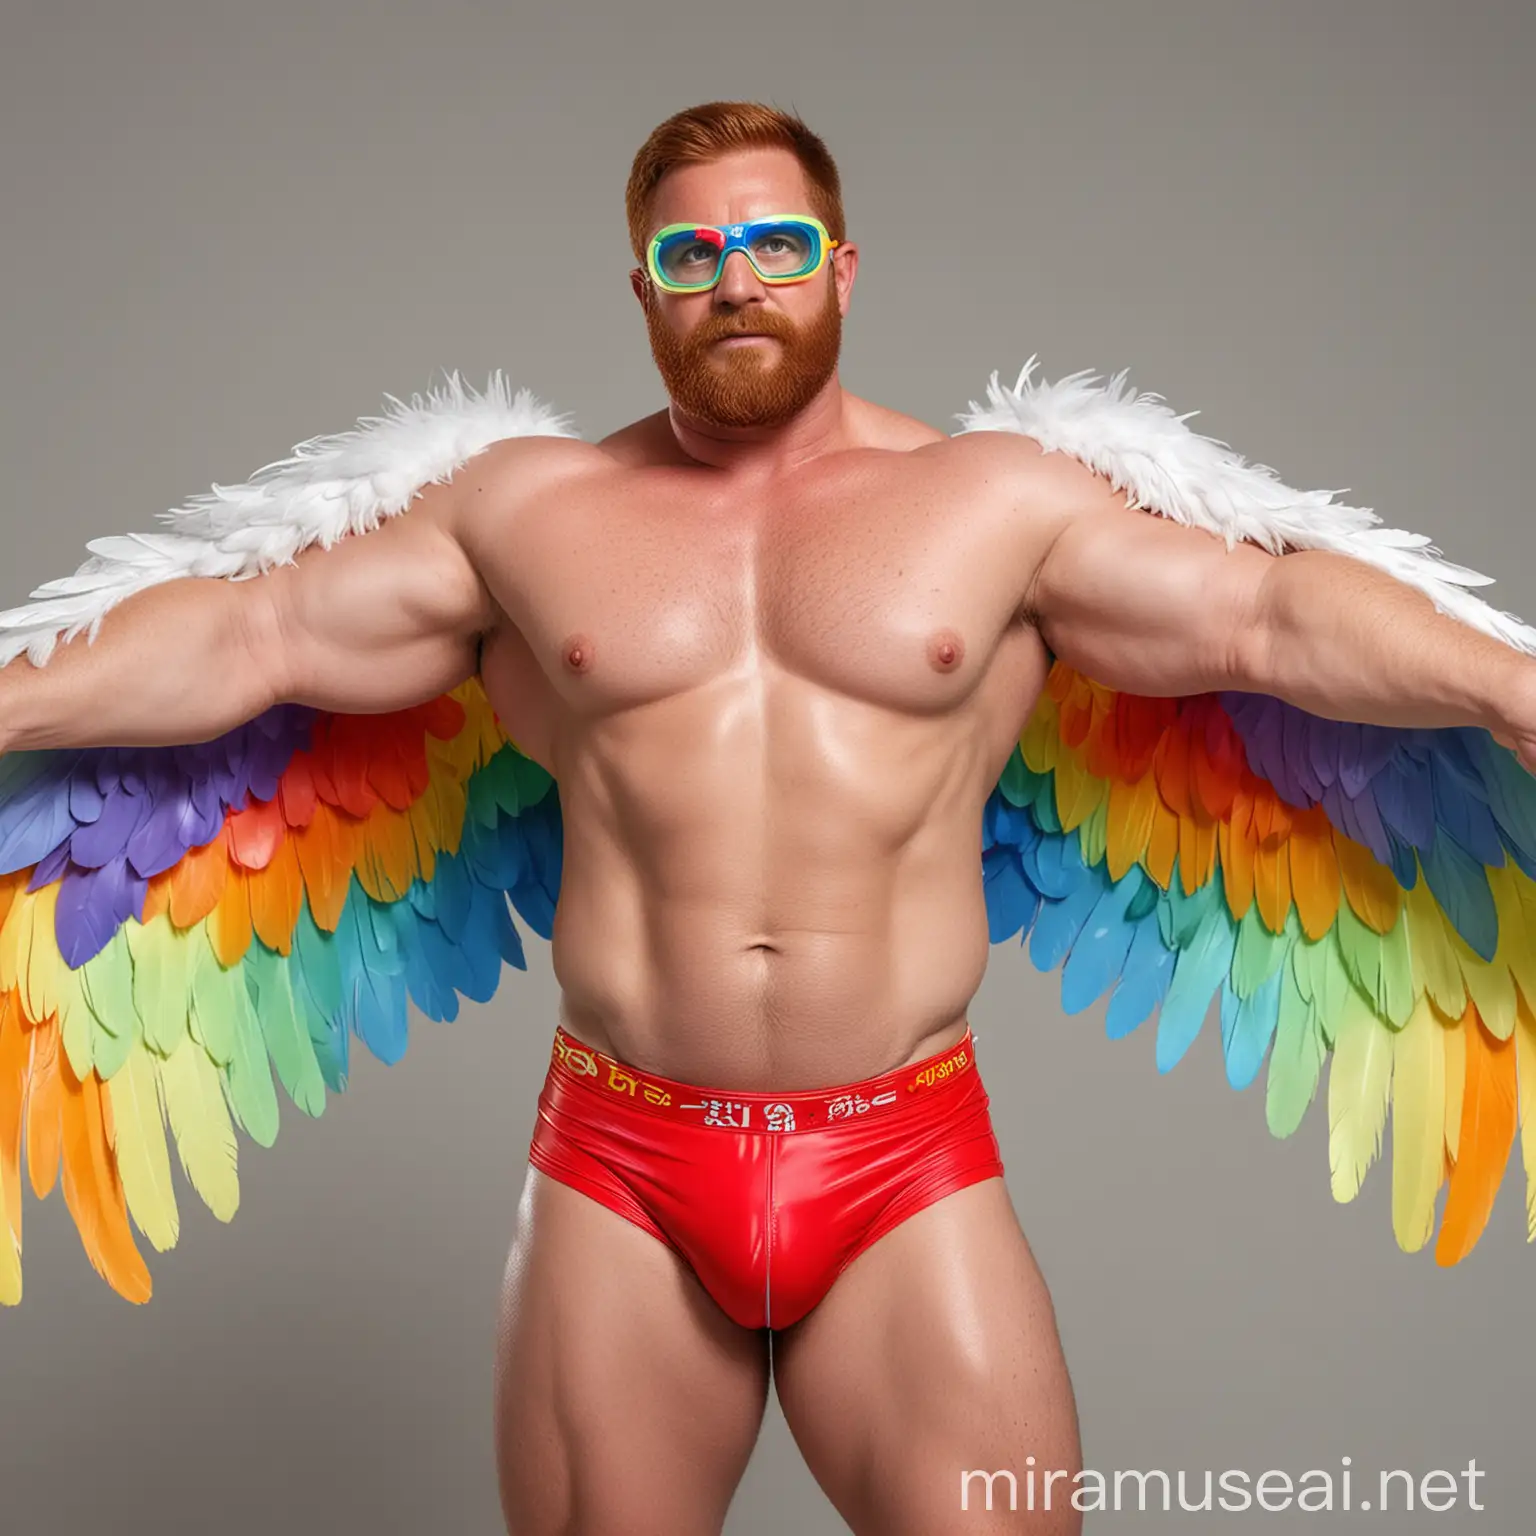 Studio Light Topless 40s Ultra Beefy Red Head Bodybuilder Daddy Beautiful Green Eyes with Beard Wearing Multi-Highlighter Bright Rainbow Coloured See Through huge Eagle Wings Shoulder Jacket short shorts Flexing his Big Strong Arm Up with Doraemon Goggles on forehead
